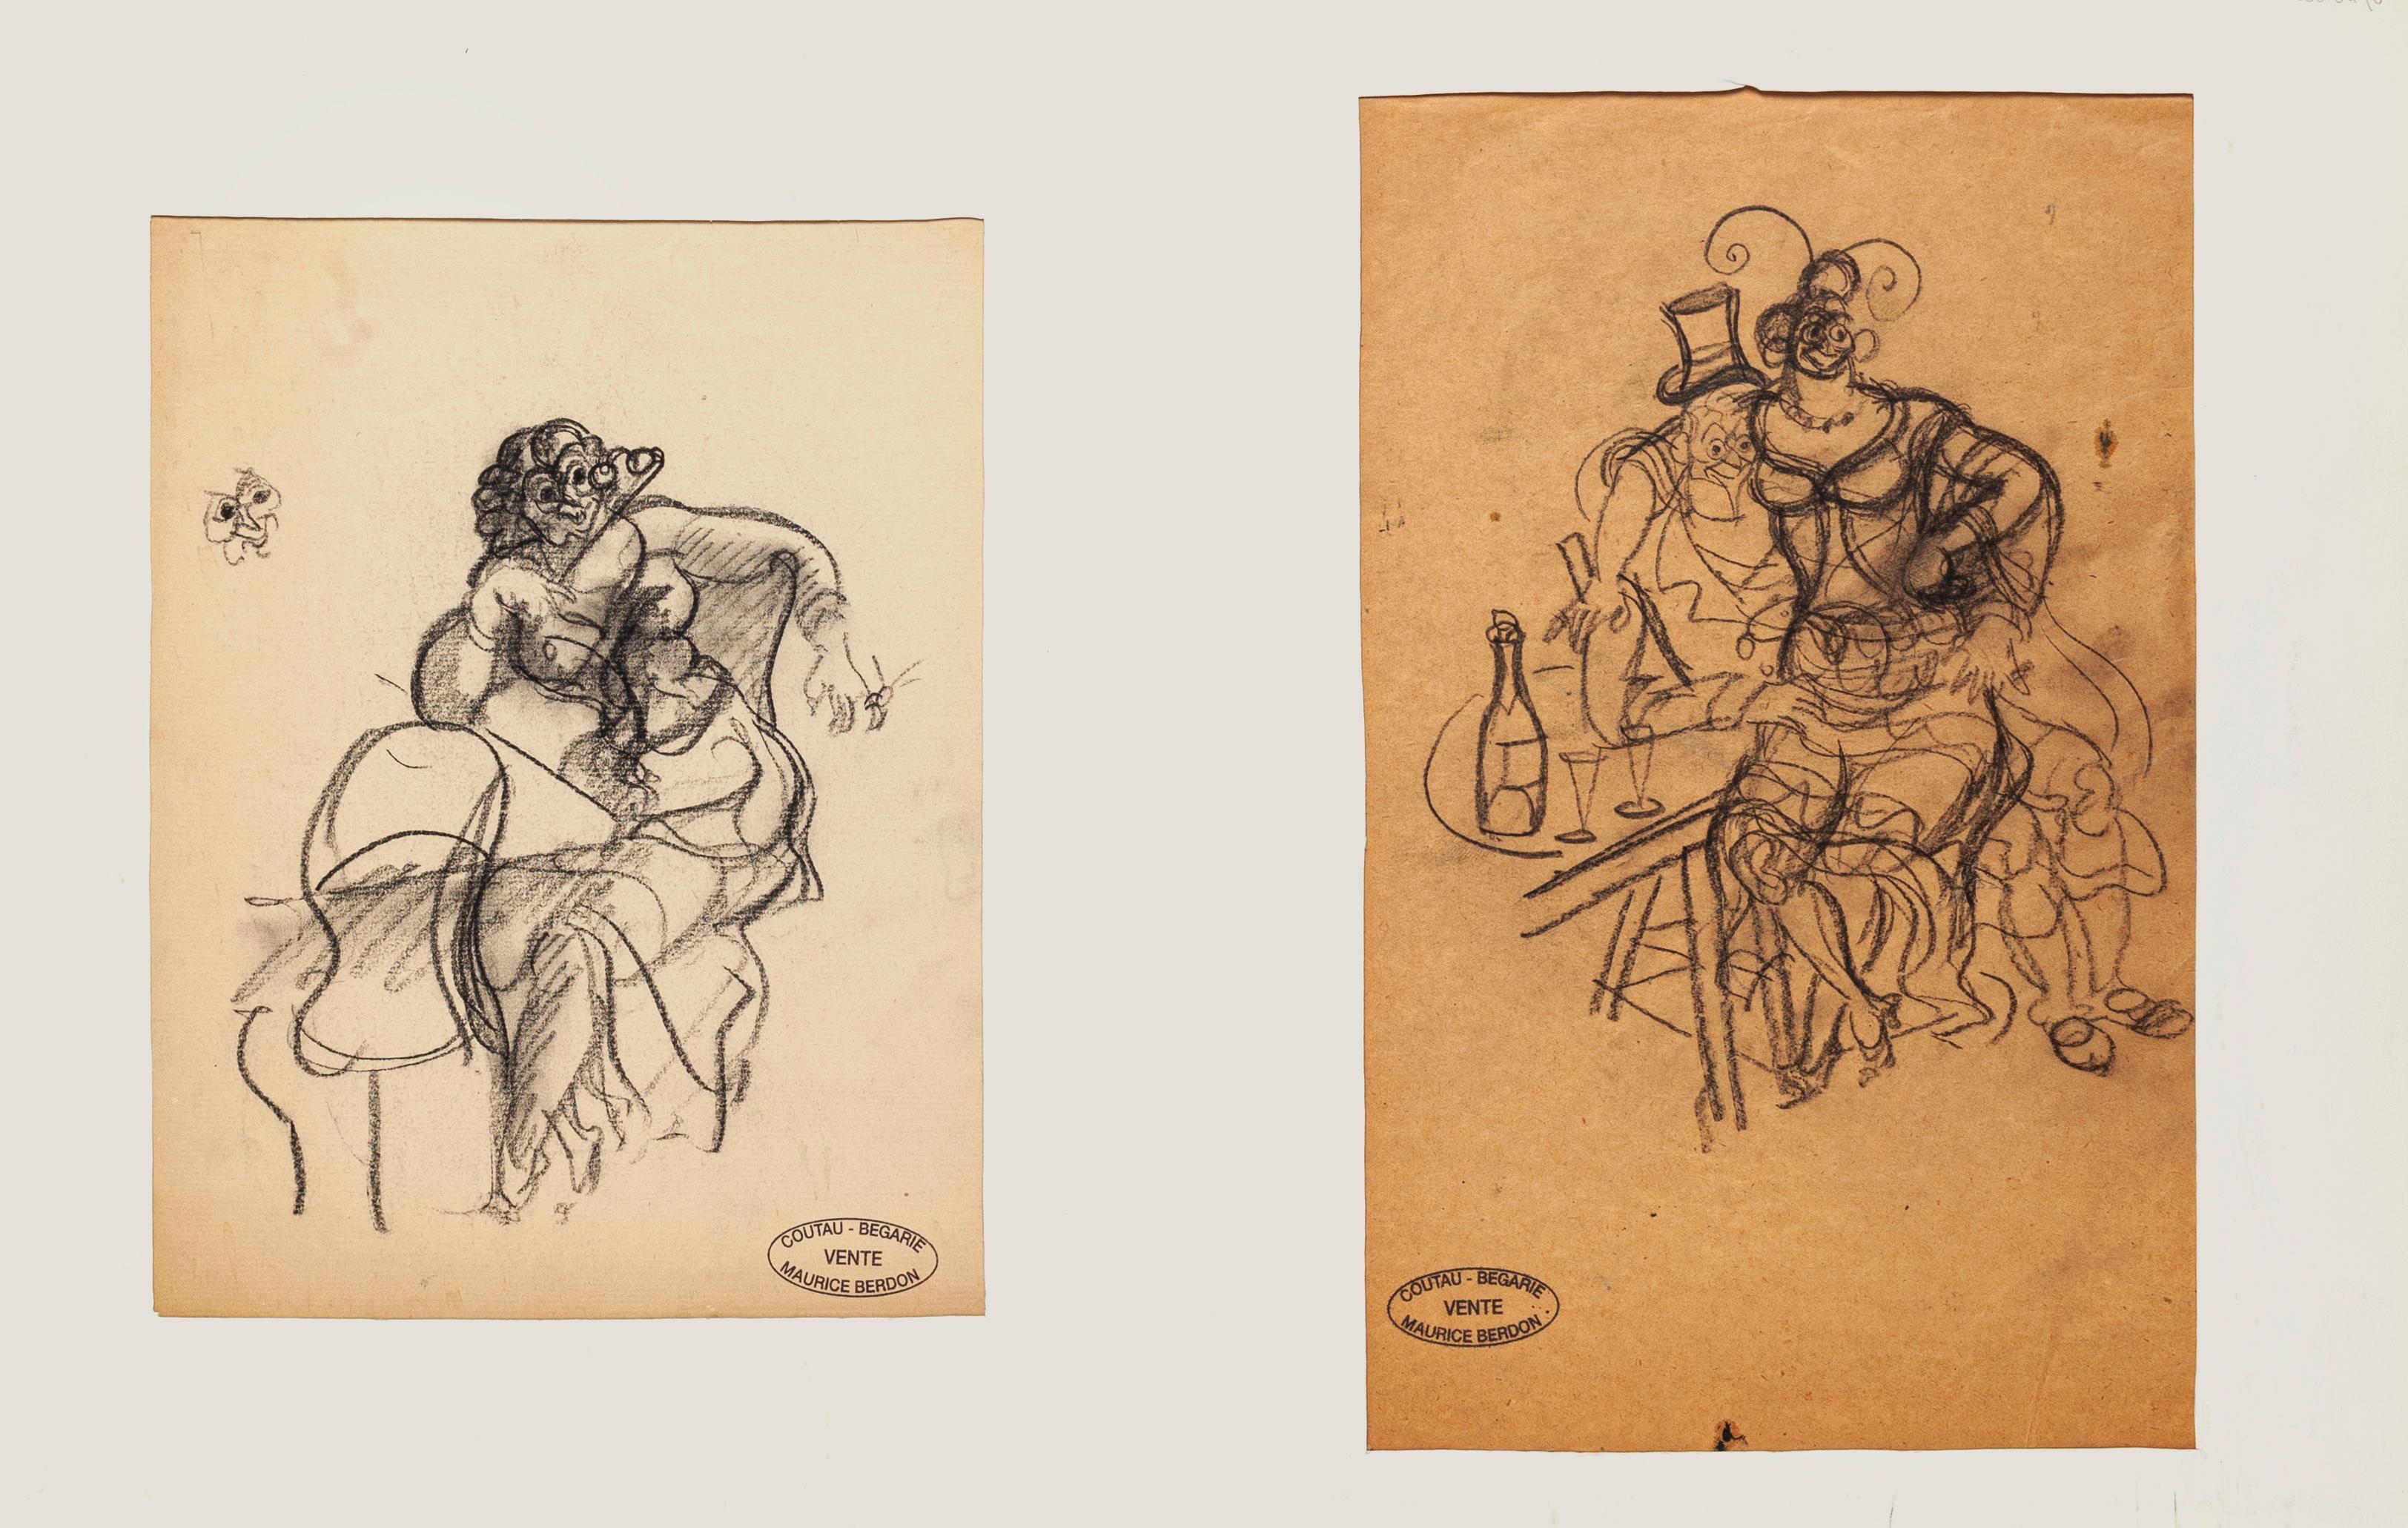 Figures is a composition of two drawings each of different dimension, in pencil, realized by the artist Maurice Berdon, the artist of the XX century. With the stamp of the artist on it. The state of preservation is very good and with a trace of